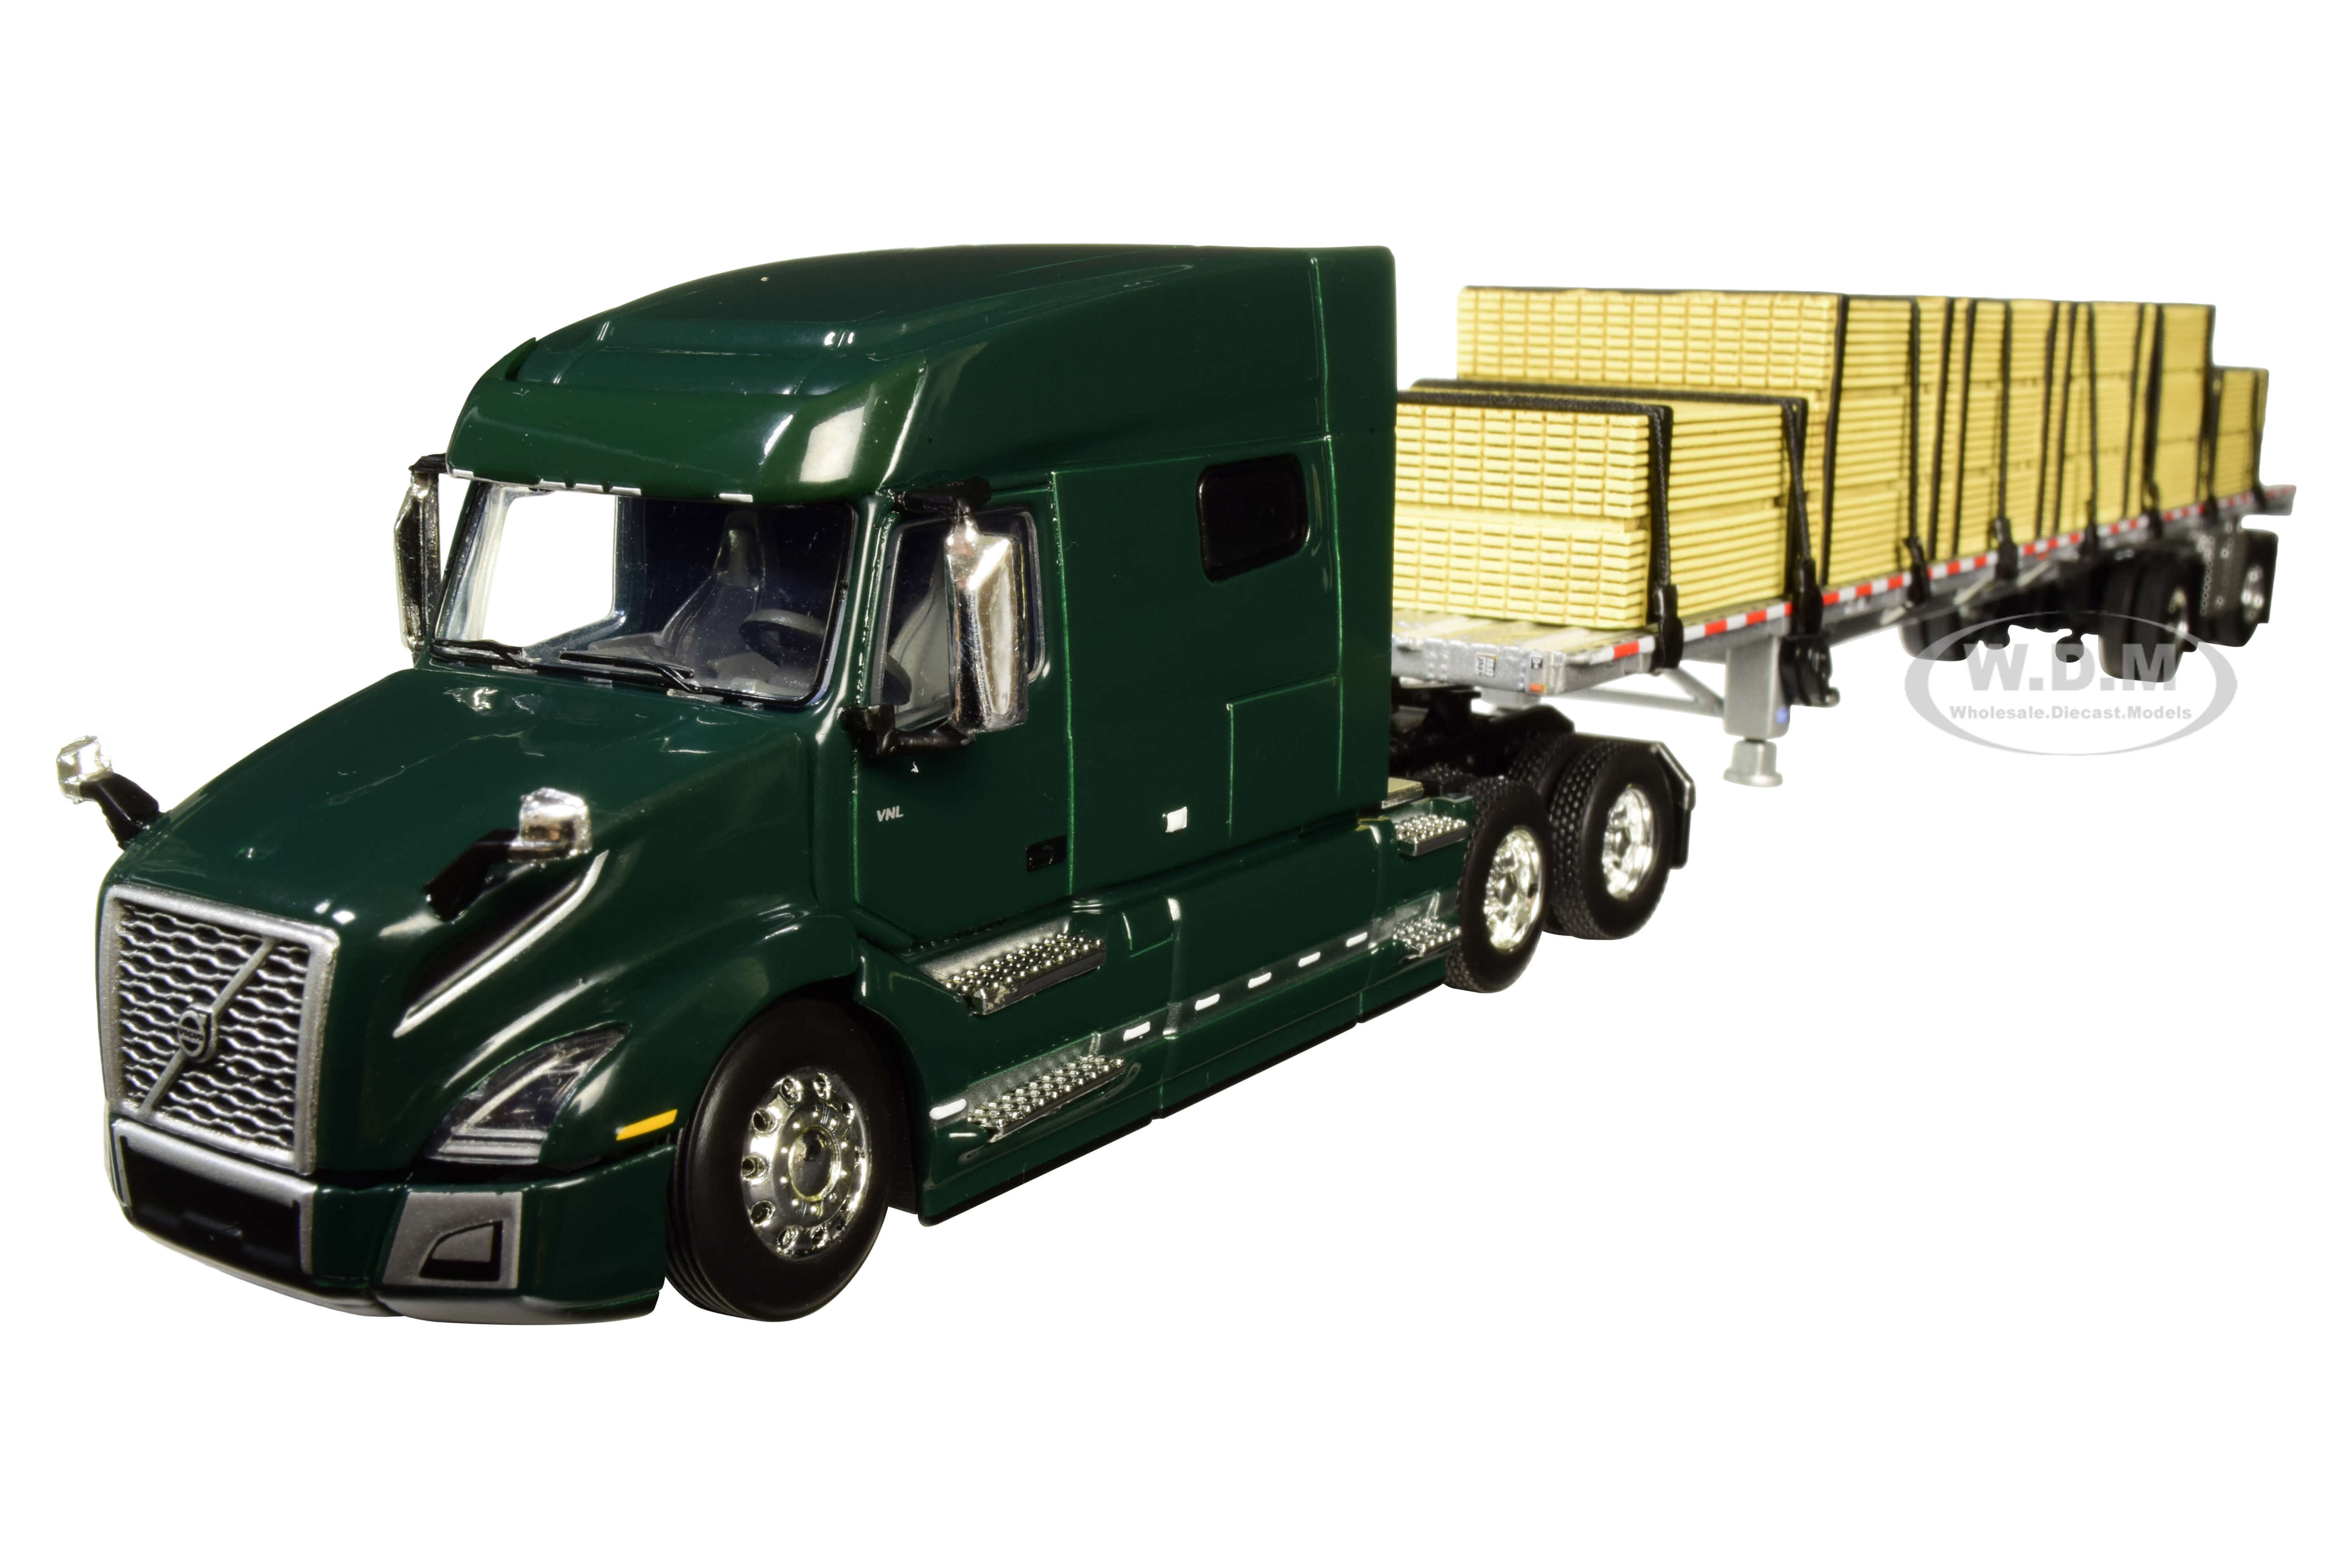 Volvo Vnl 760 Mid-roof Sleeper Cab Forest Green With Wilson Flatbed Trailer And Lumber Load 1/64 Diecast Model By Dcp/first Gear